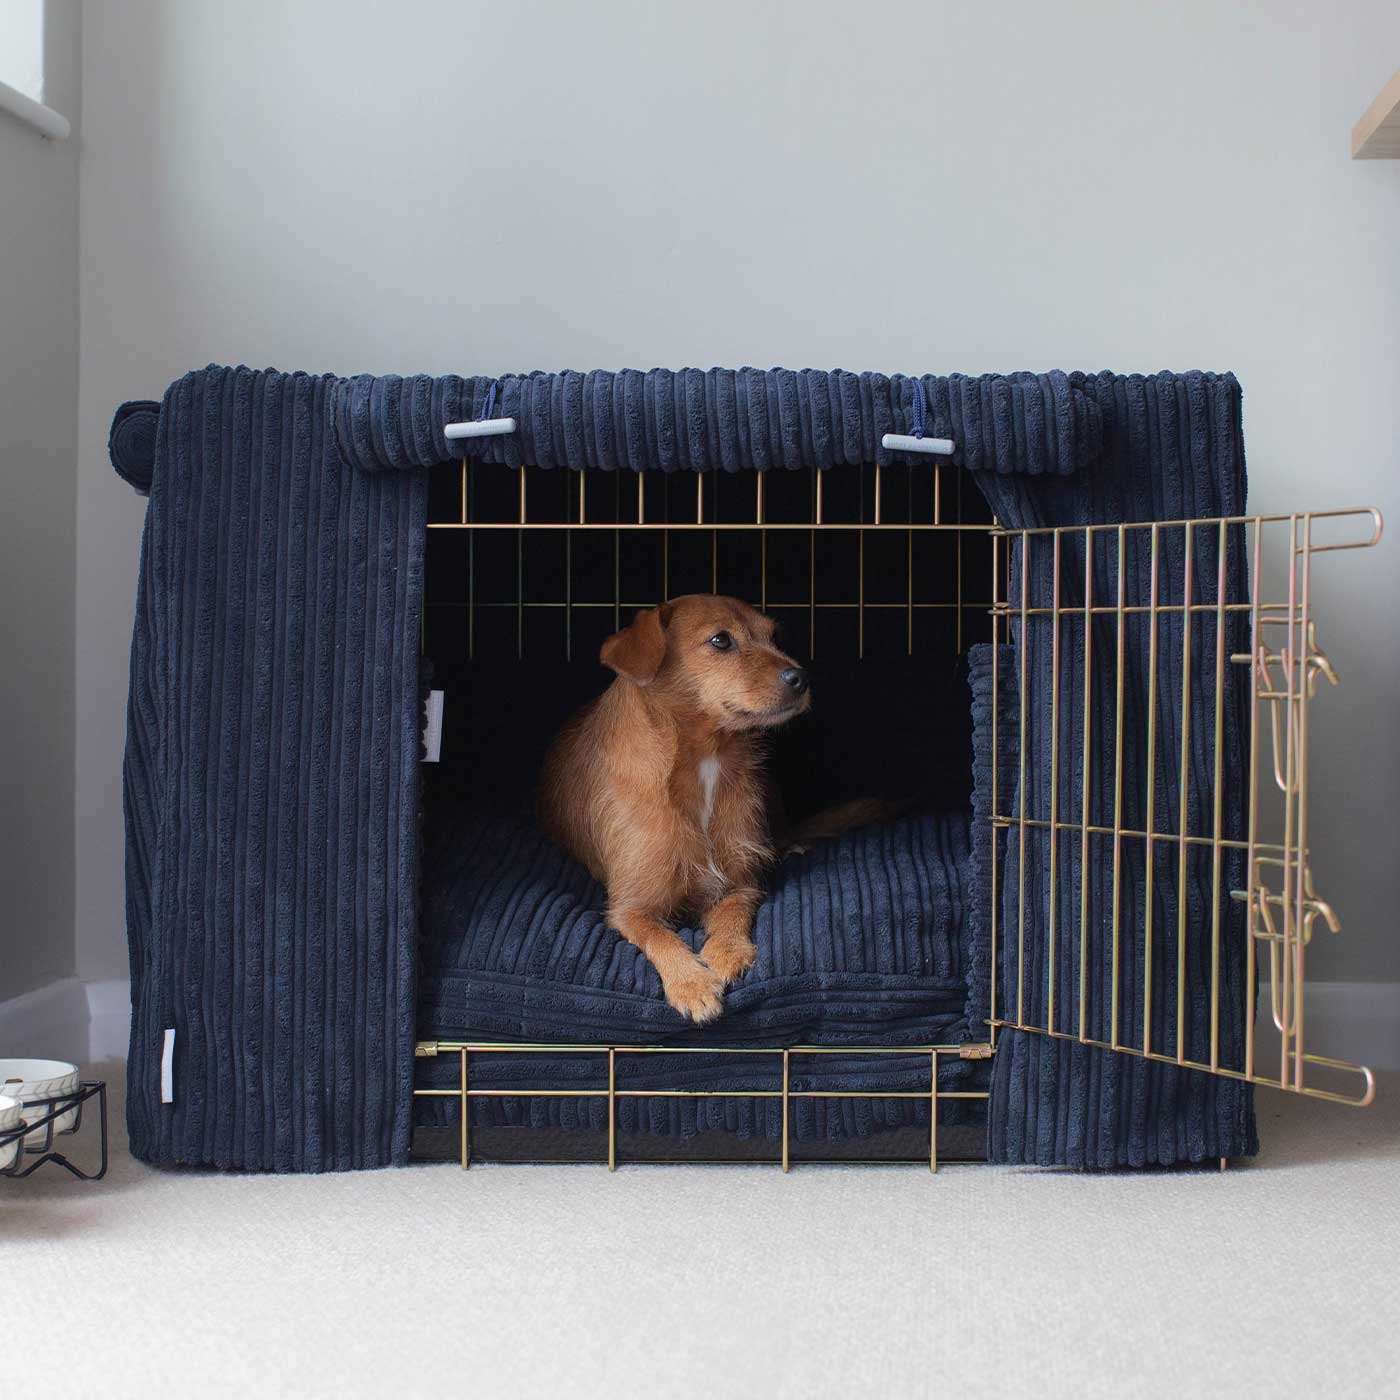 Luxury Dog Crate Set, Essentials Complete Plush Crate Set In Navy! Build The Ultimate Dog Den For The Perfect Burrow! Dog Crate Cover Available To Personalise at Lords & Labradors